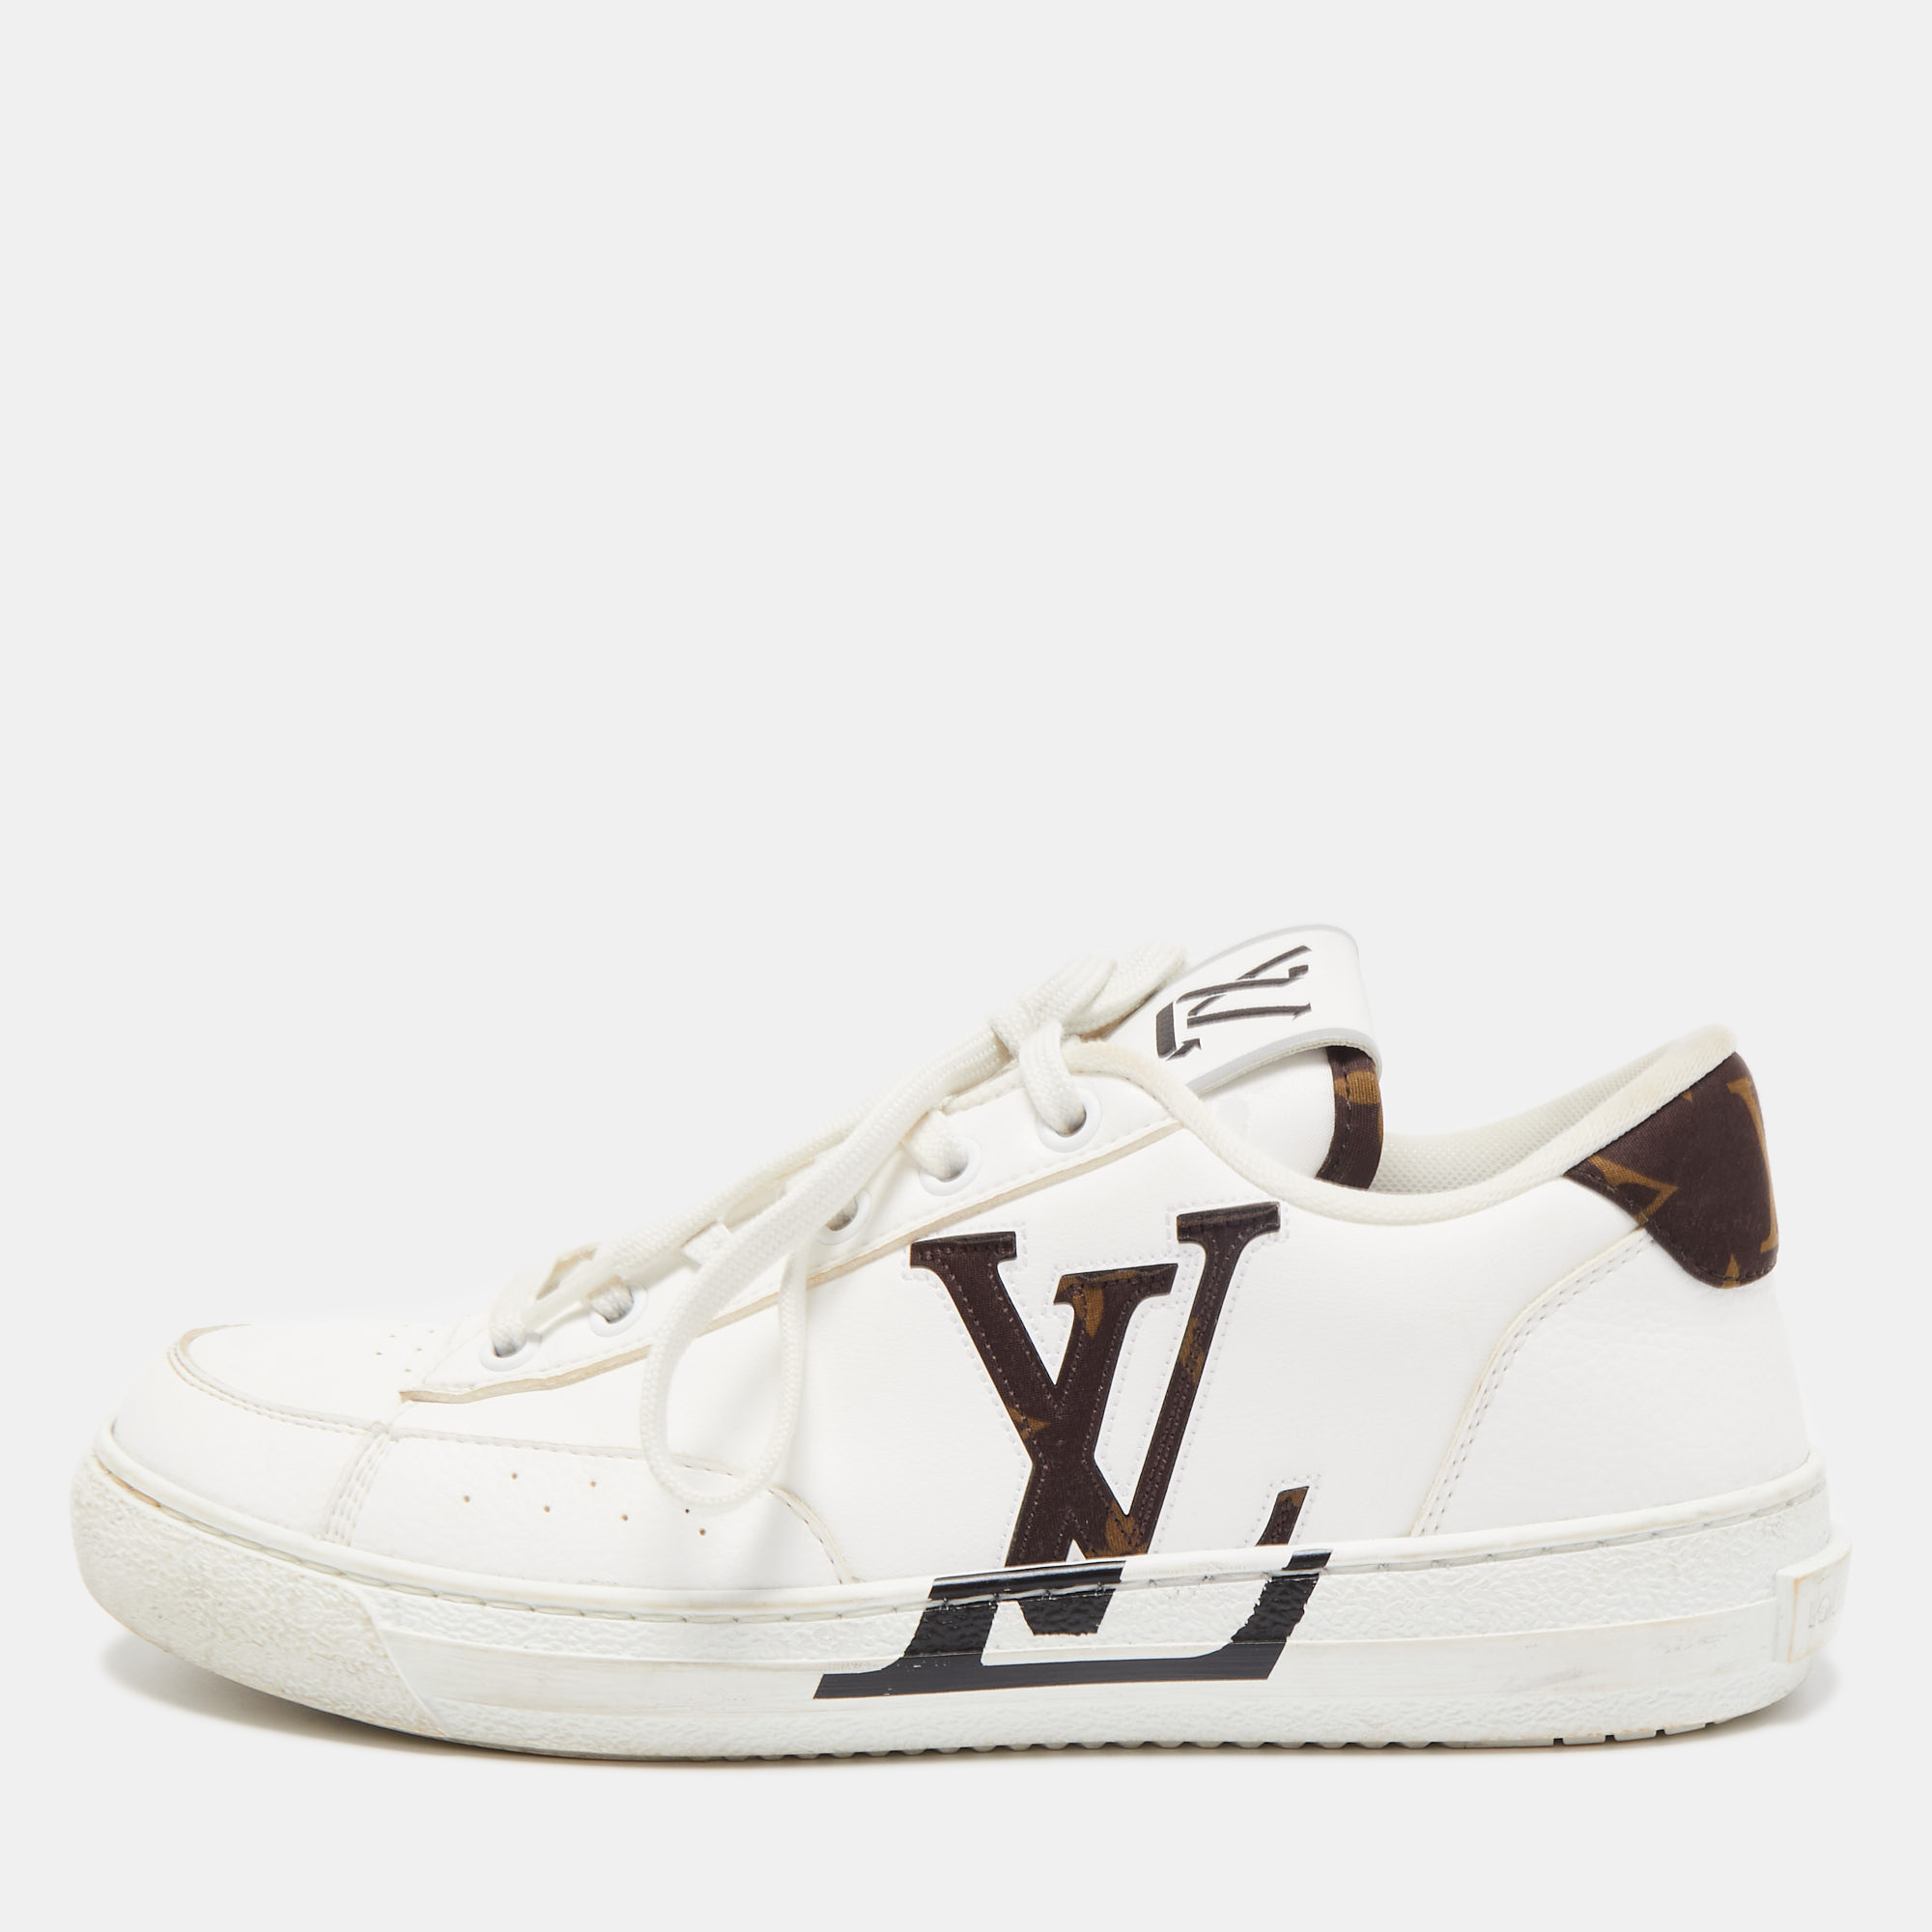 Louis Vuitton Black Shearling Lined Time Out Sneakers - LV Canada